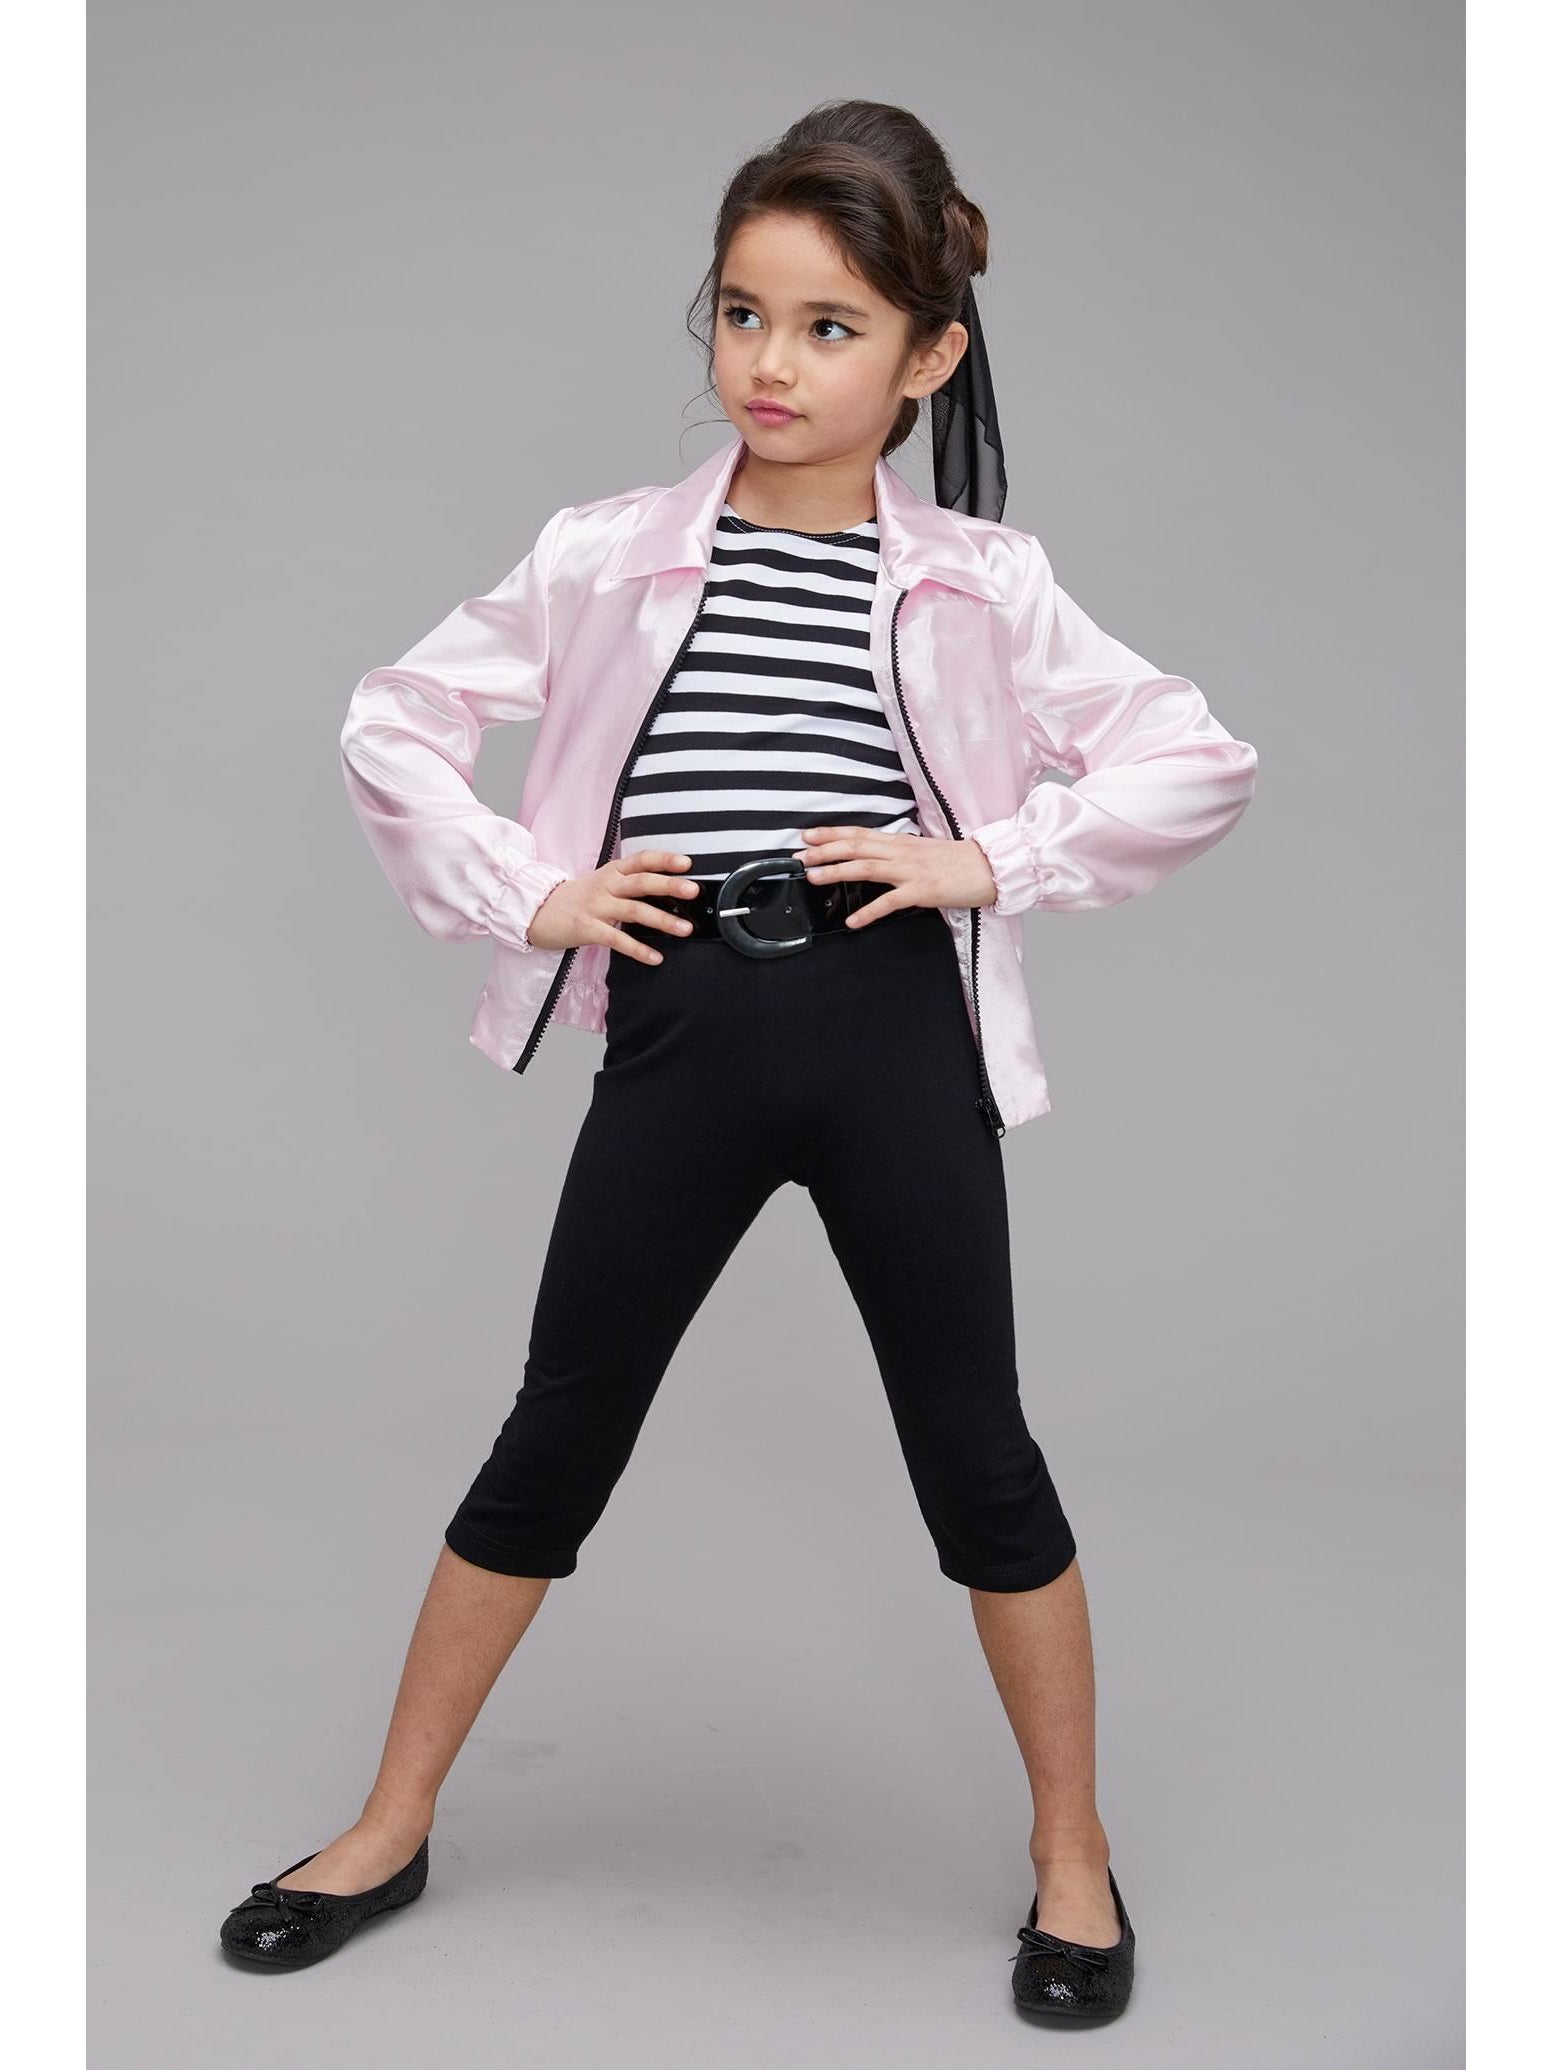 Pink Ladies 50s Costume for Girls – Chasing Fireflies